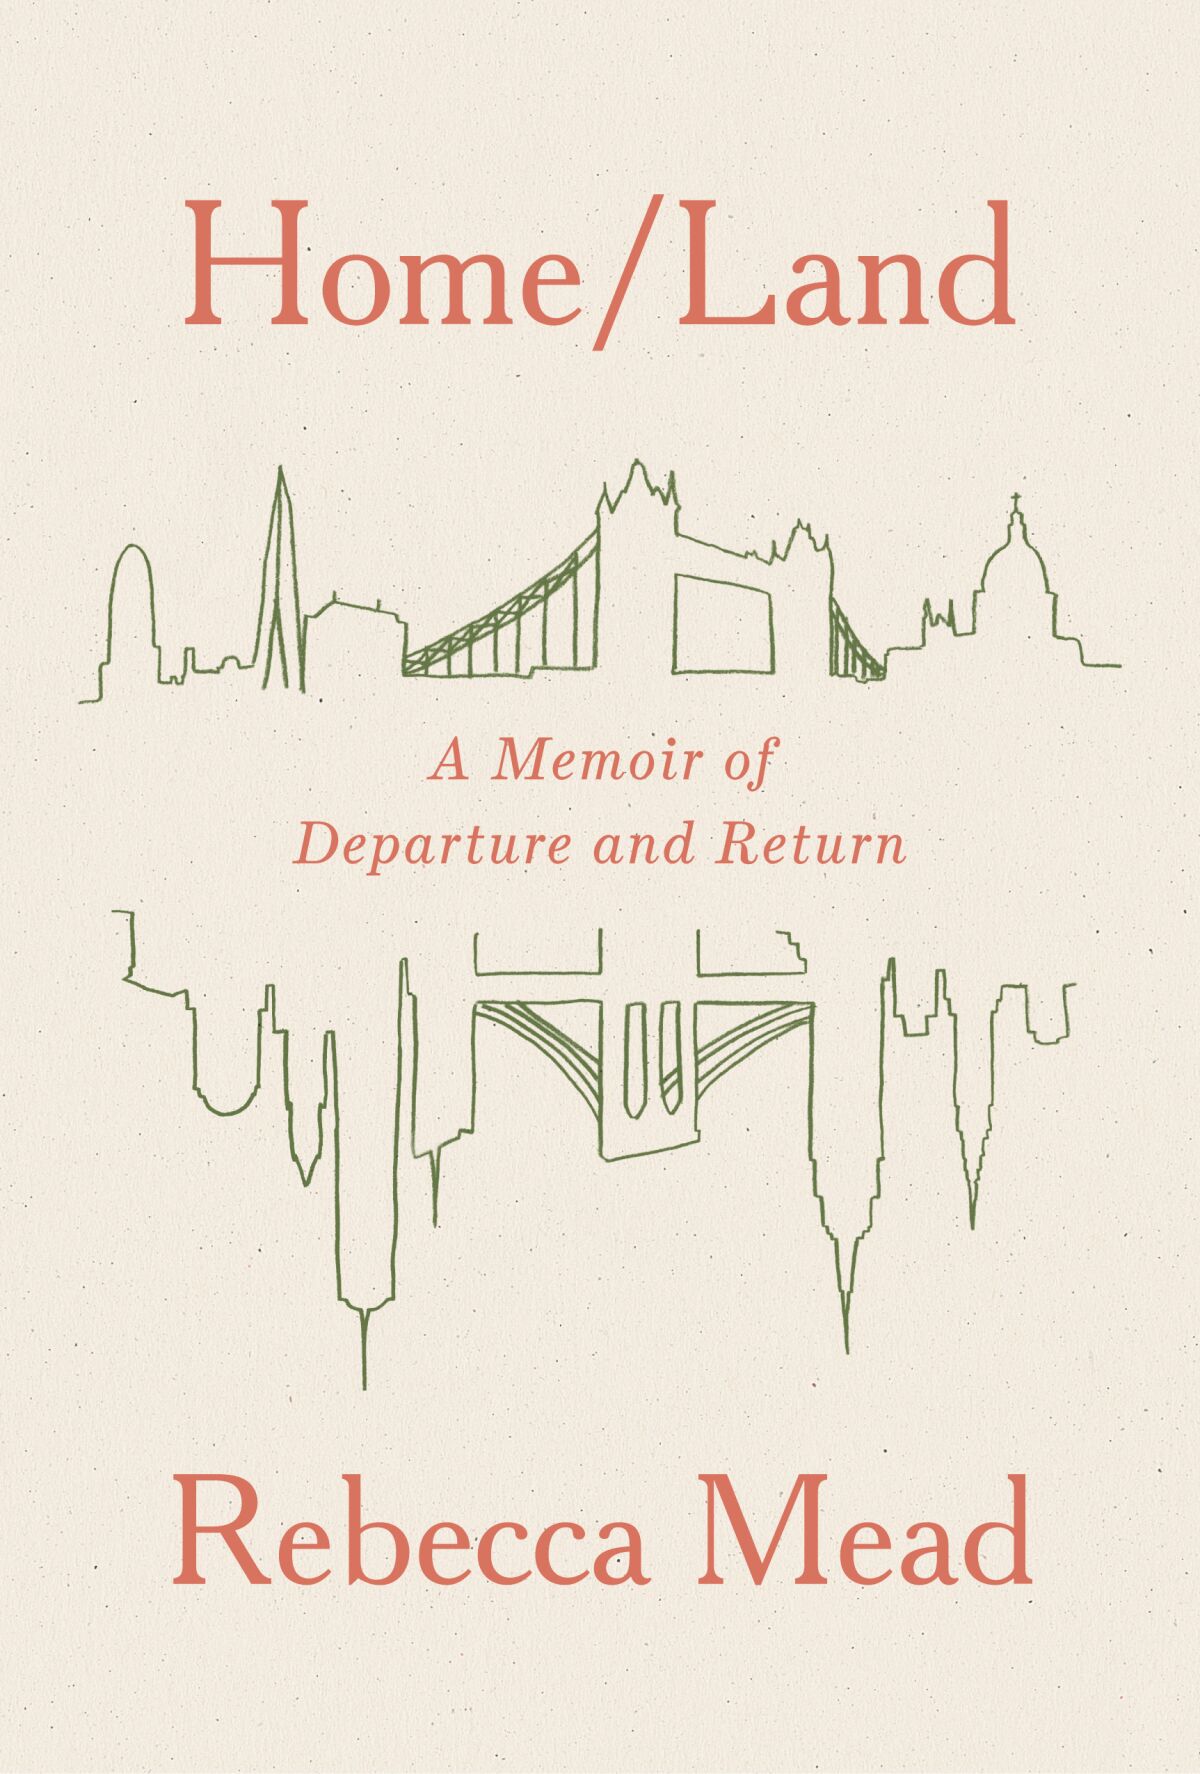 "Home/Land," by Rebecca Mead